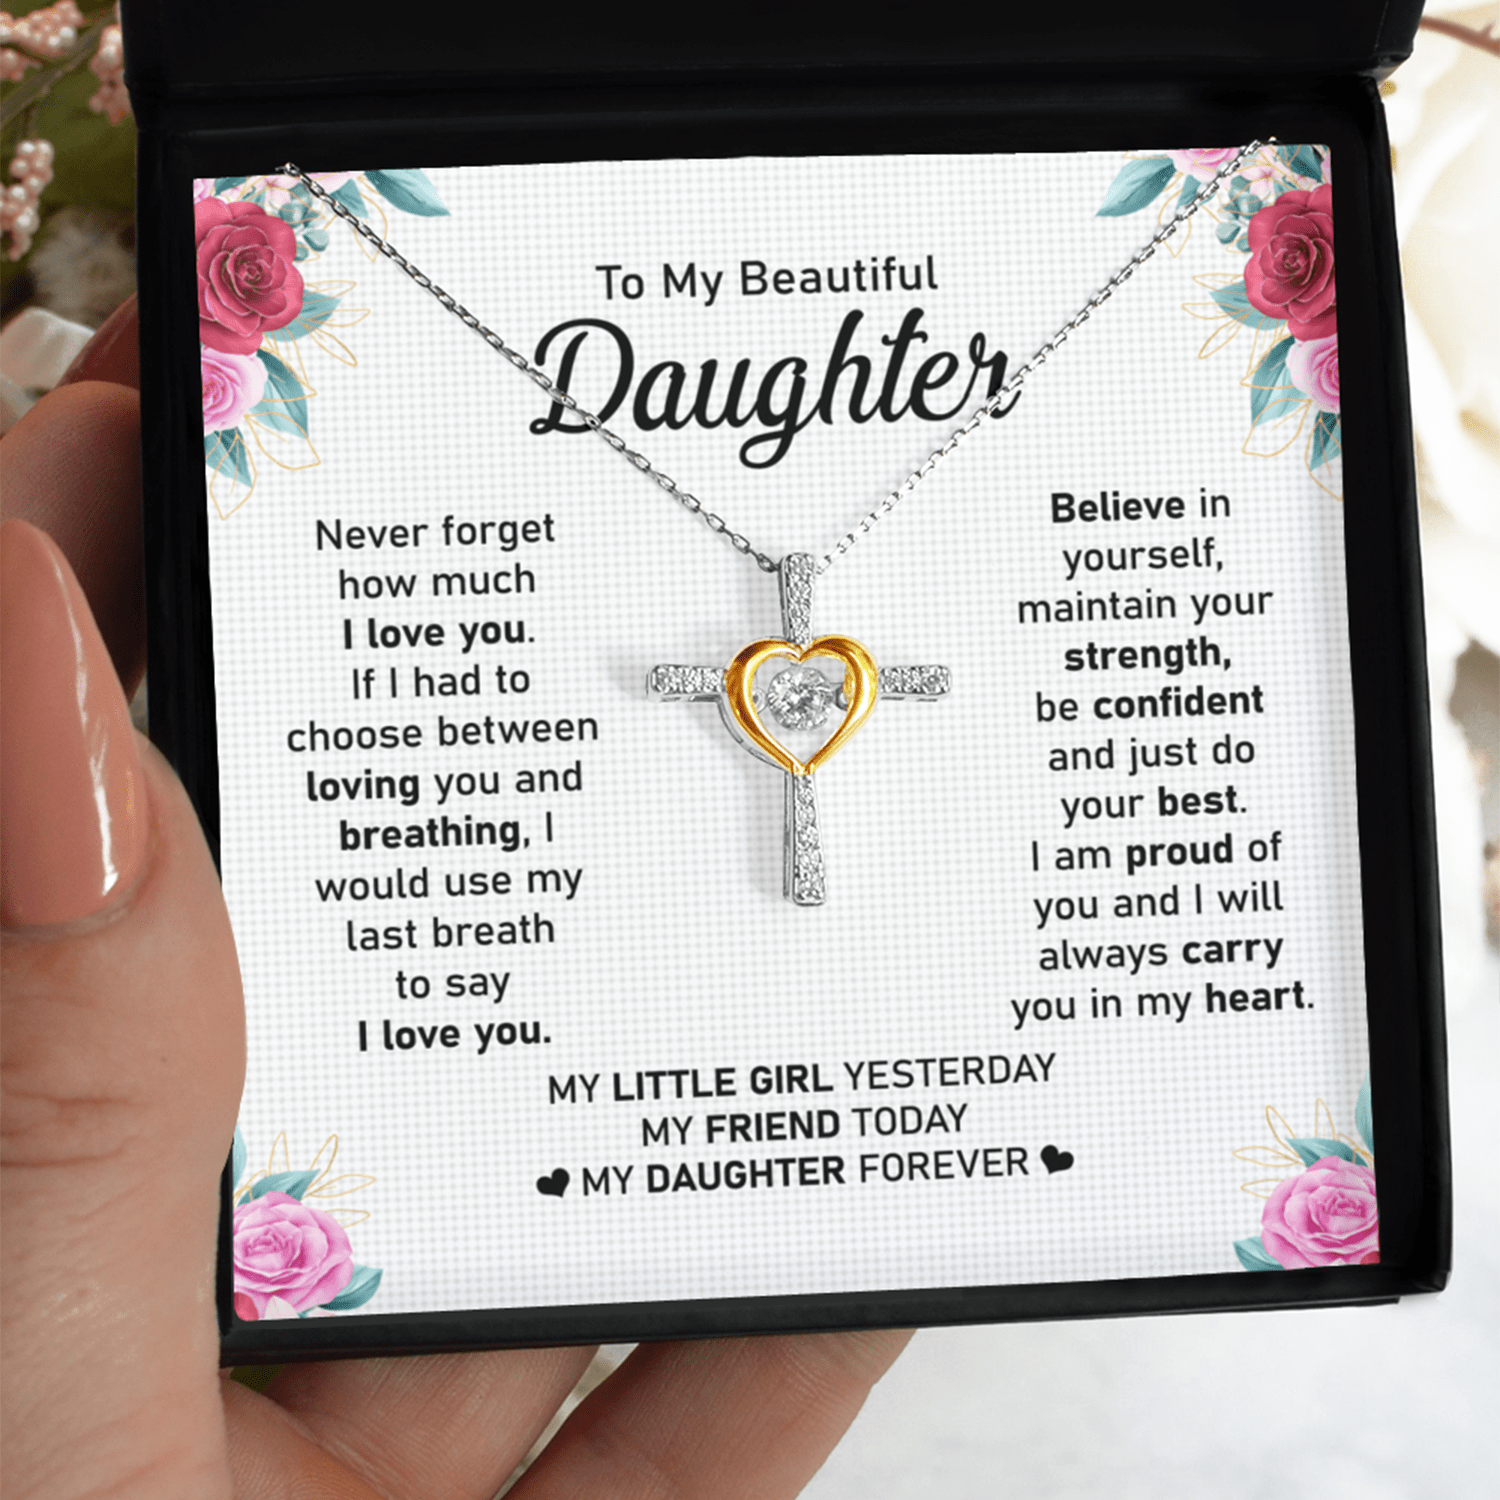 Gift For Daughter - Believe In Yourself - Cross Dancing Necklace With Message Card - Gift For Birthday, Christmas, Valentines From Dad, Mom